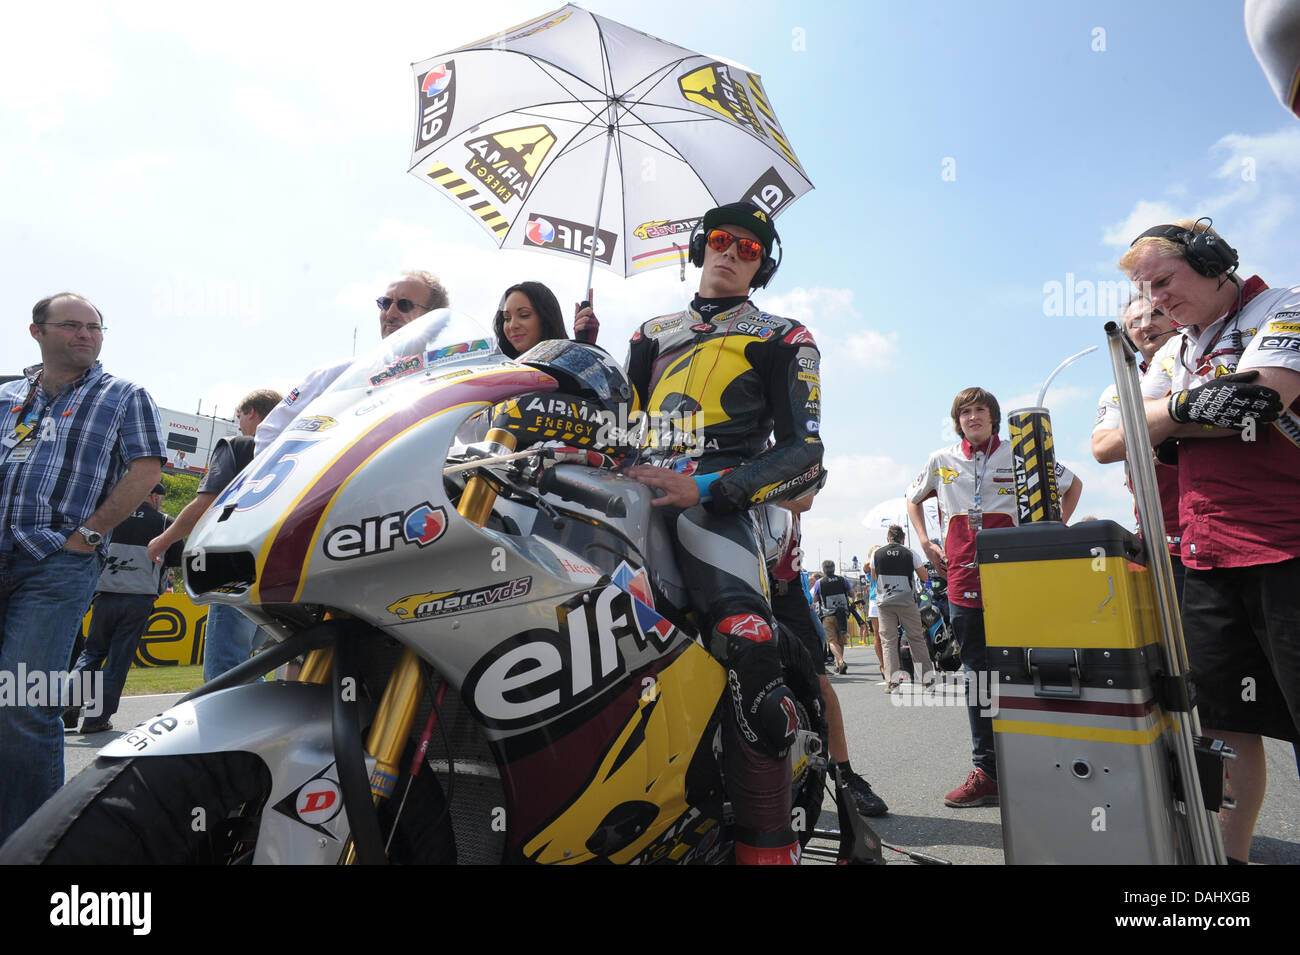 Oberlungwitz, Germany. 14th july 2013. Scott Redding (Marc VDS Racing) on the grid of Sachsenring circuit Stock Photo